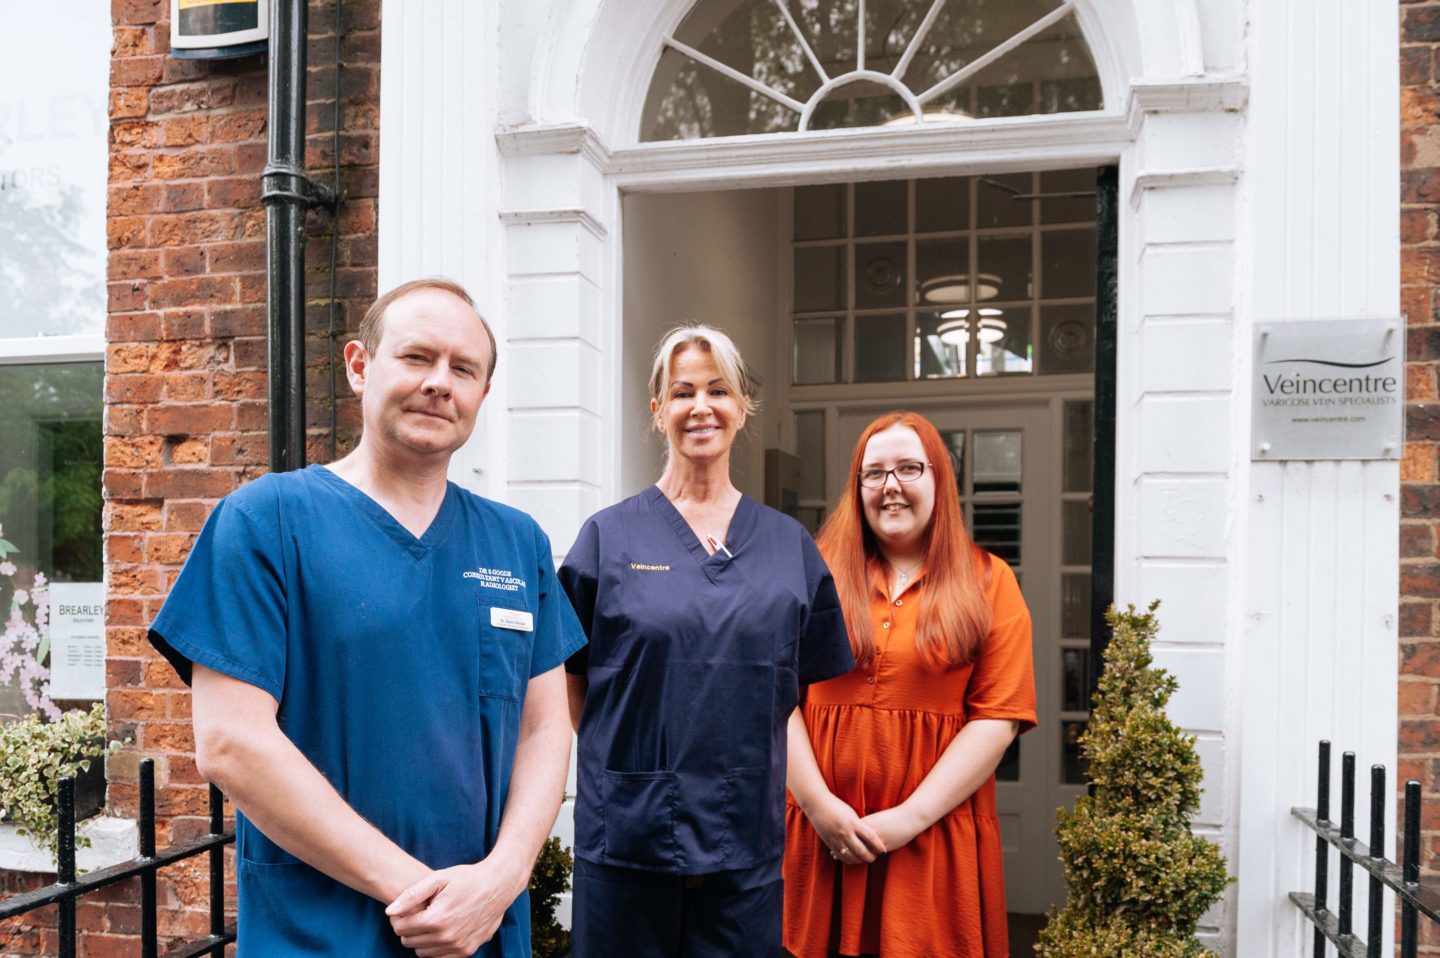 Members of our fantastic team at Veincentre Leeds, our varicose vein and thread vein treatment centre in Leeds